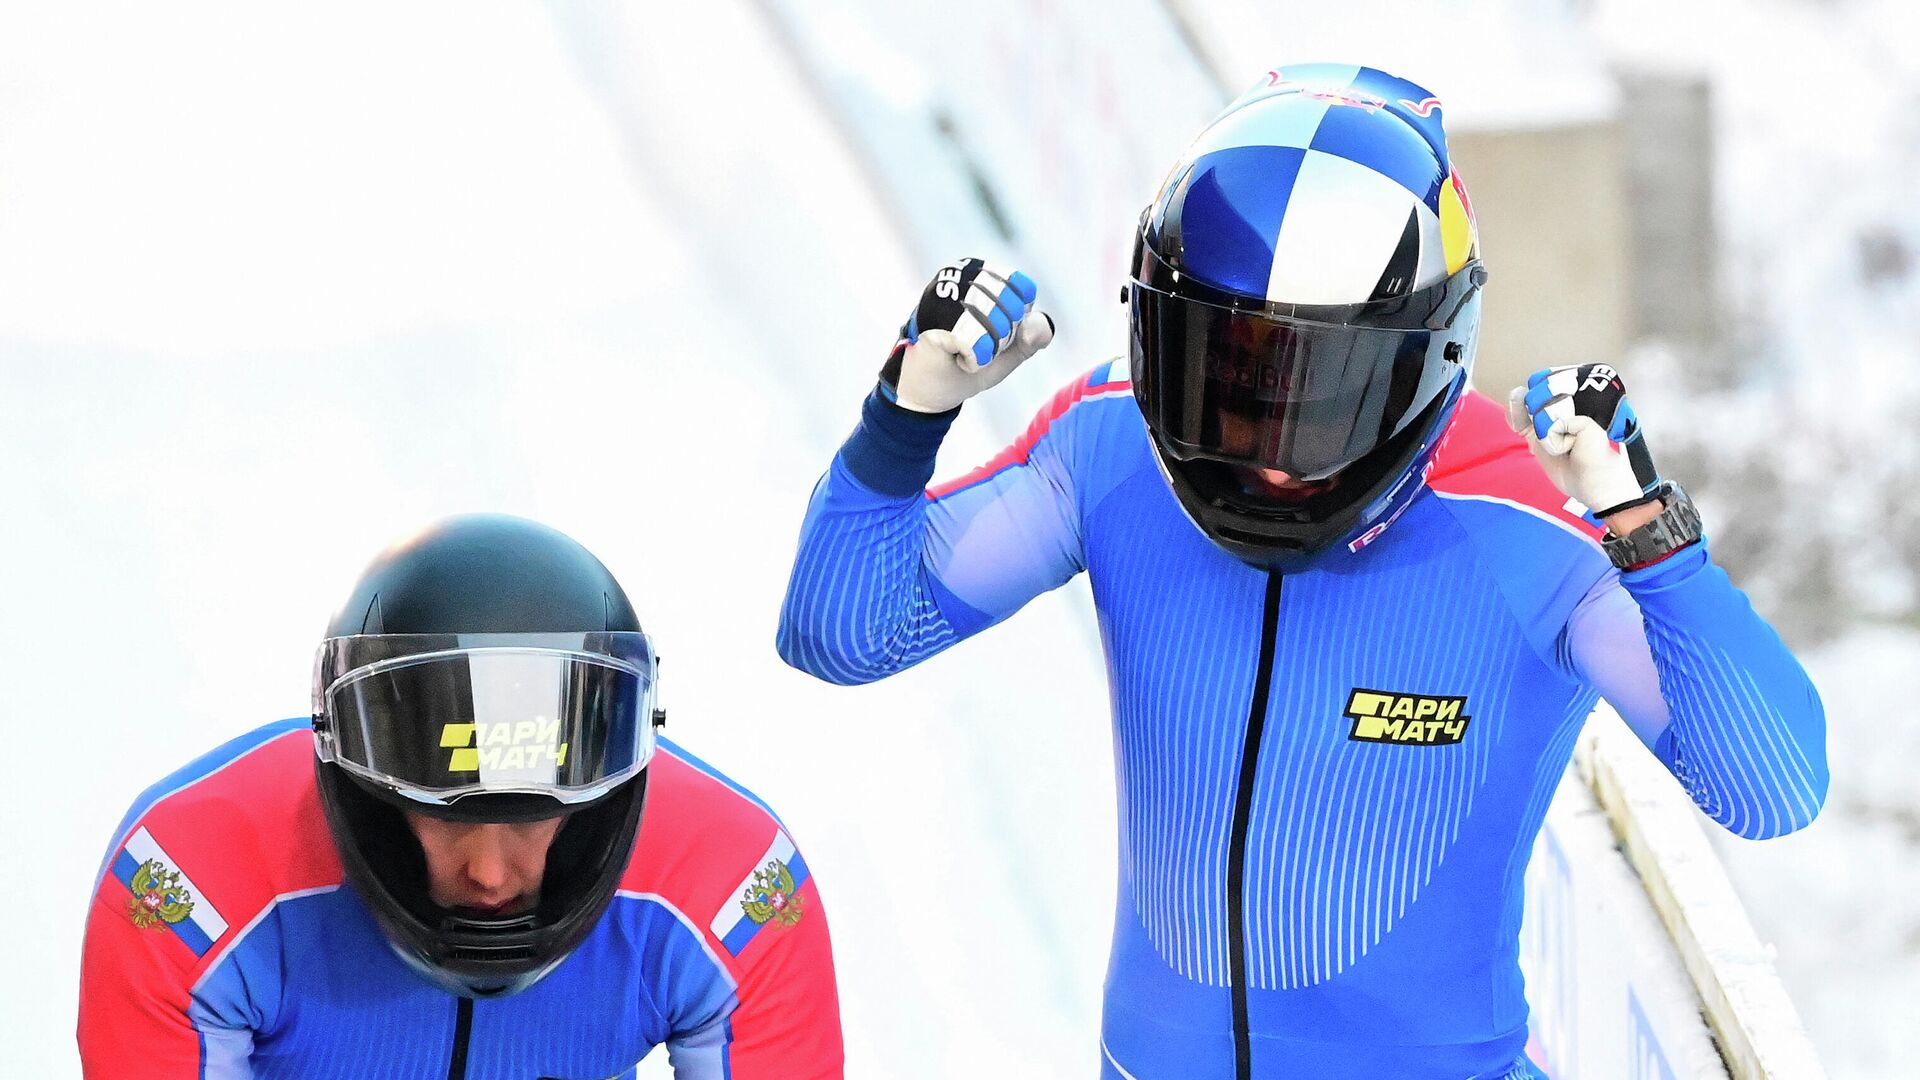 Rostislav Gaitiukevich (R) and Mikhail Mordasov of Russia react after placing third in the 2-men Bobsleigh race in Altenberg on December 4, 2021. (Photo by Tobias SCHWARZ / AFP) - РИА Новости, 1920, 15.01.2022